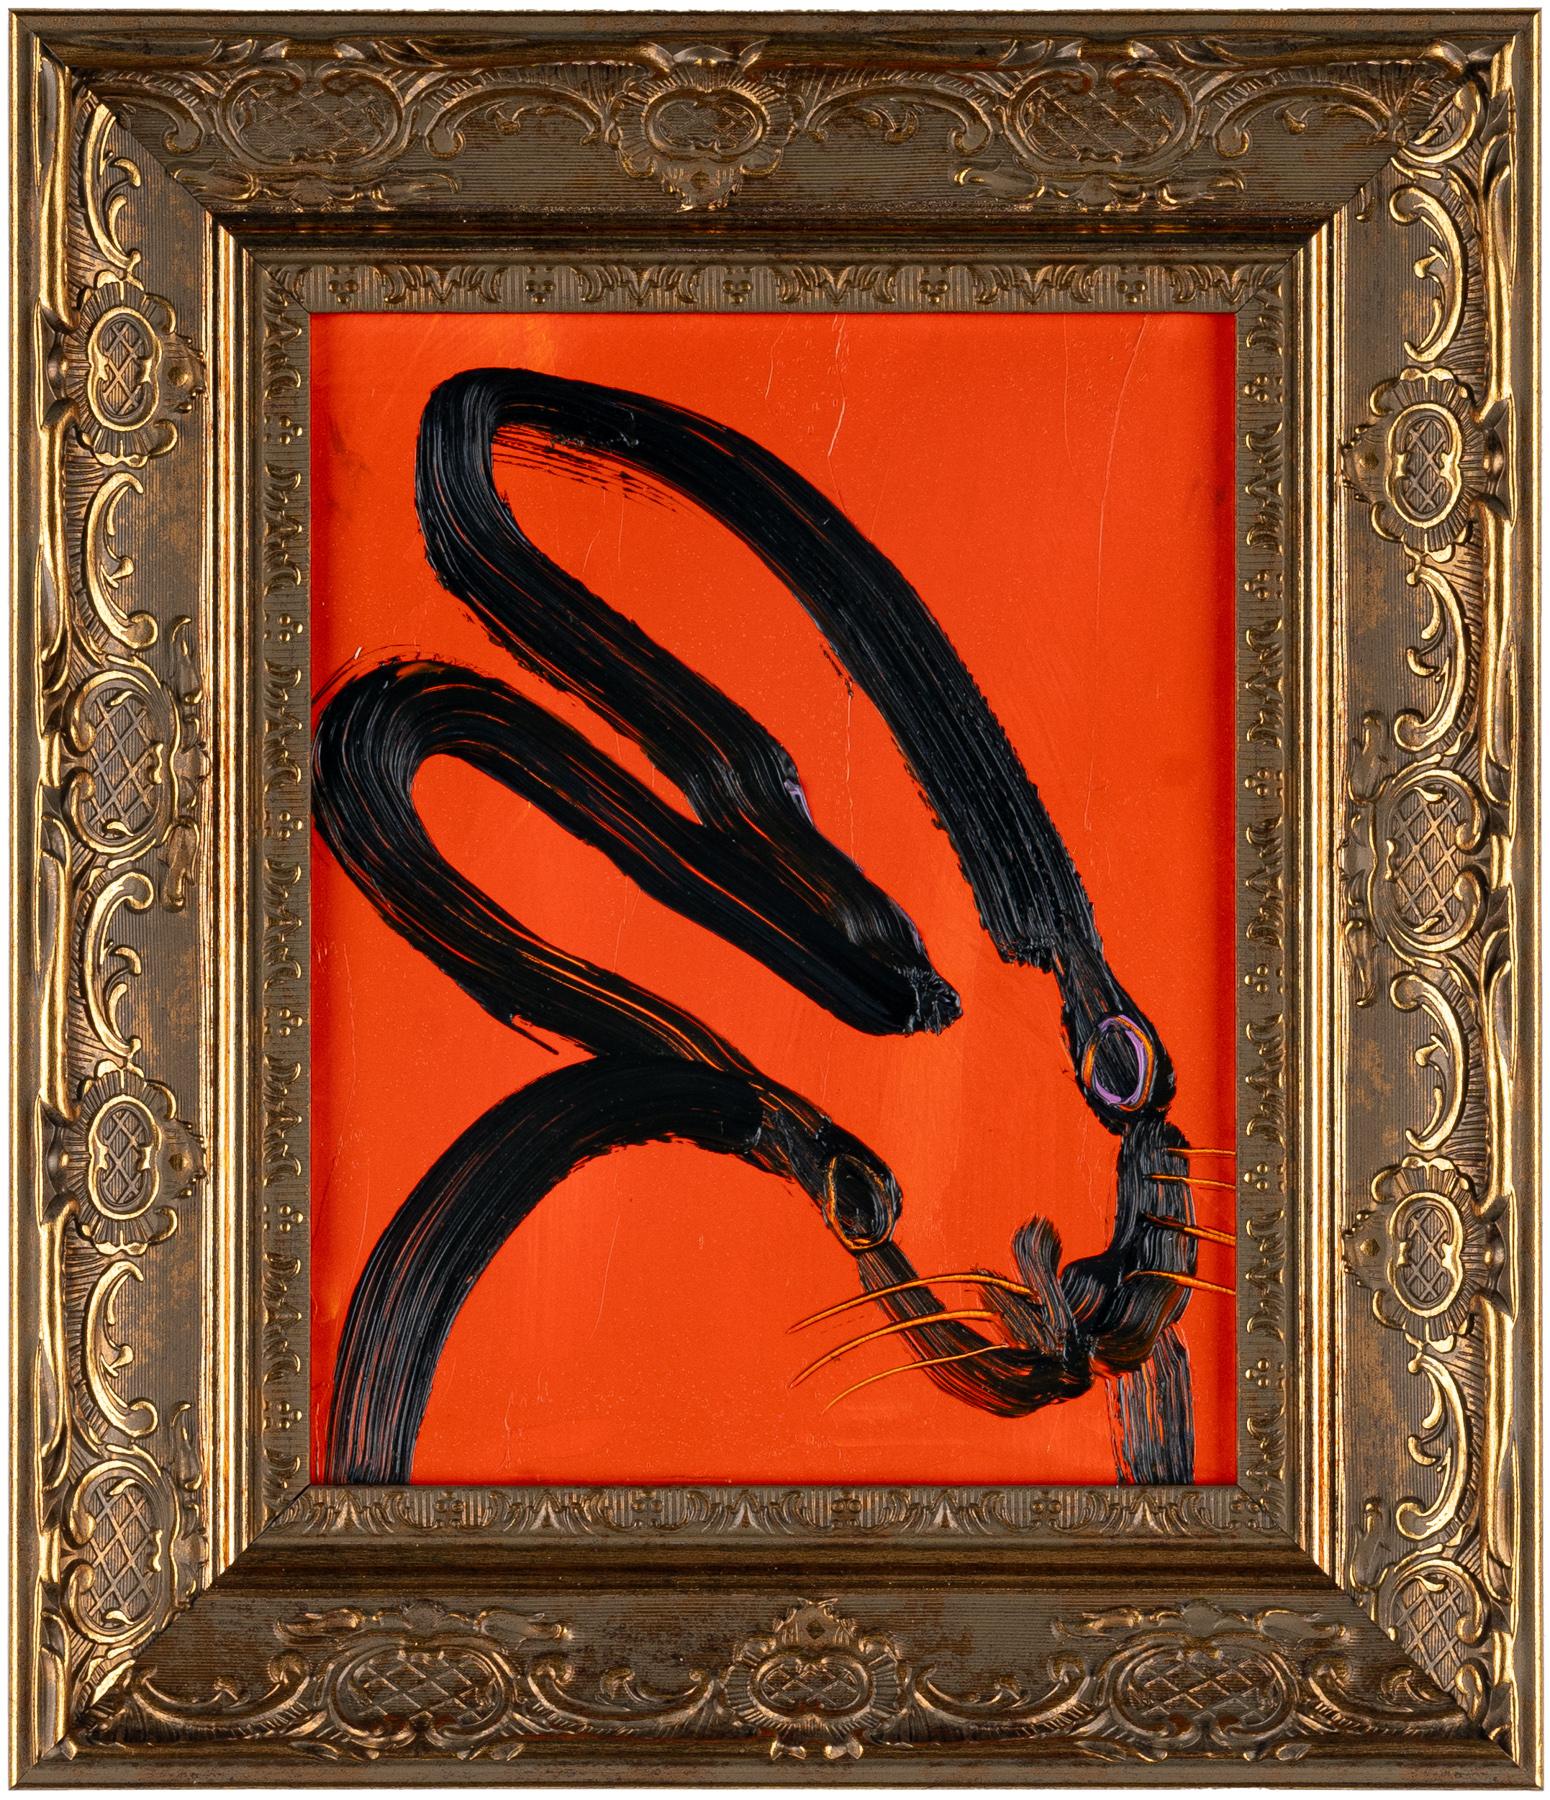 Available at Madelyn Jordon Fine Art. Hunt Slonem's bunny oil painting 'Winter' 2024. Oil on wood, 10 x 8 in. / Frame: 14.5 x 12.5 in. This painting features Slonem's signature bunny outlined in black over a red background. Framed in a hand-picked,